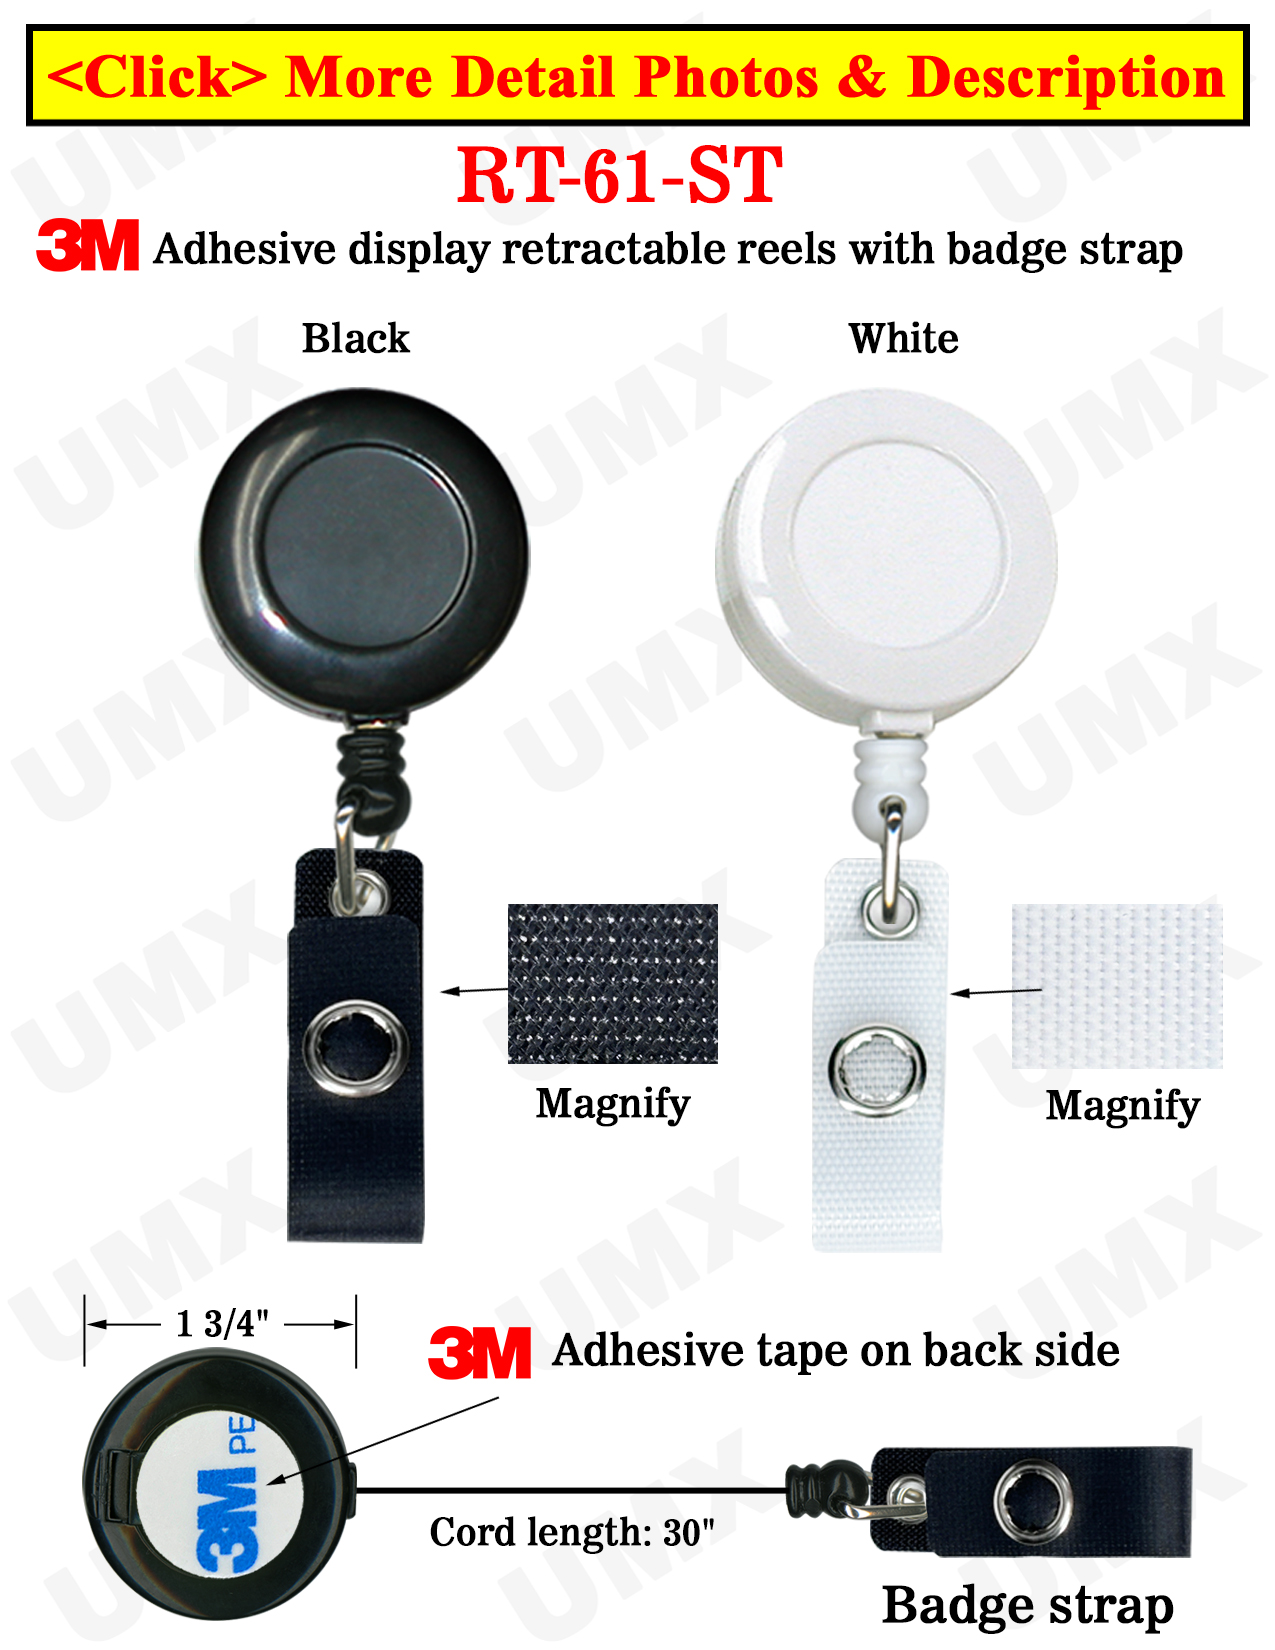 http://www.usalanyards.com/a/making/hardware/buckle/safety/RT-61-3M/adhesive-display-retractable-reels-rt-61-st-5.jpg